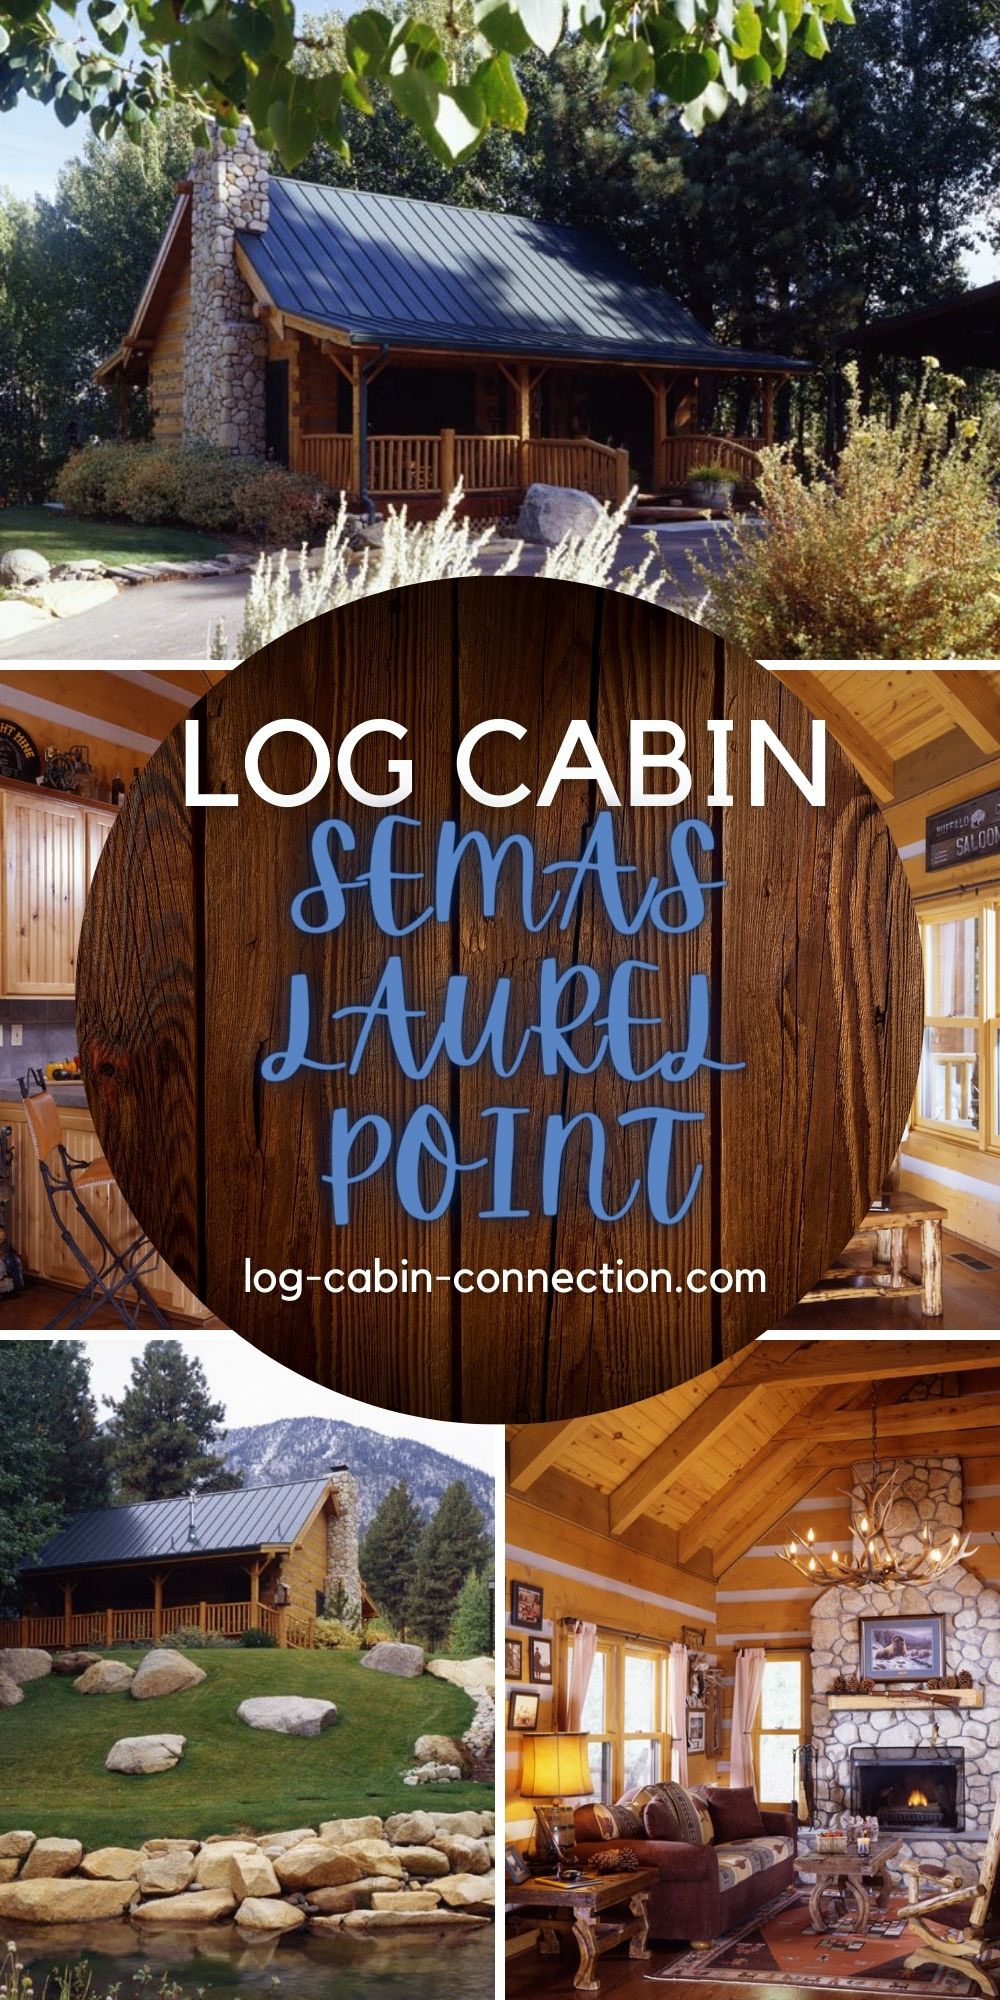 Semas Laurel Point Log Cabin Is In A Stunning Rustic Setting